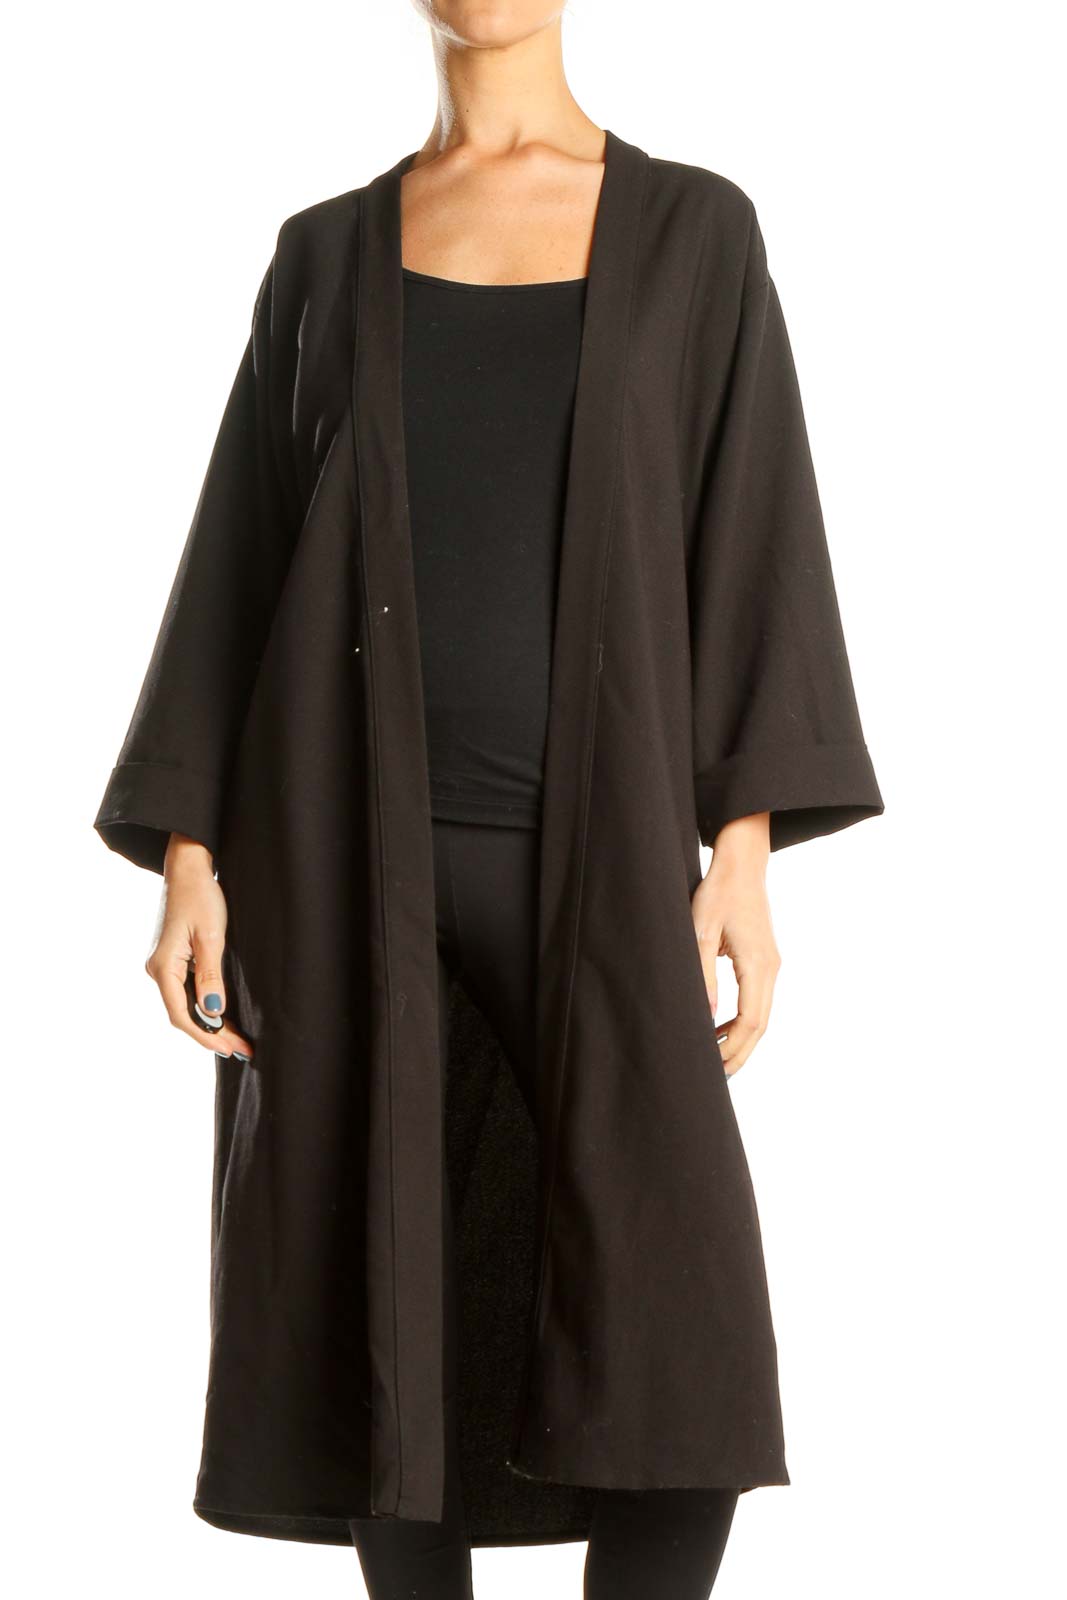 Black Long Sleeve Light Throw-over Cardigan Front